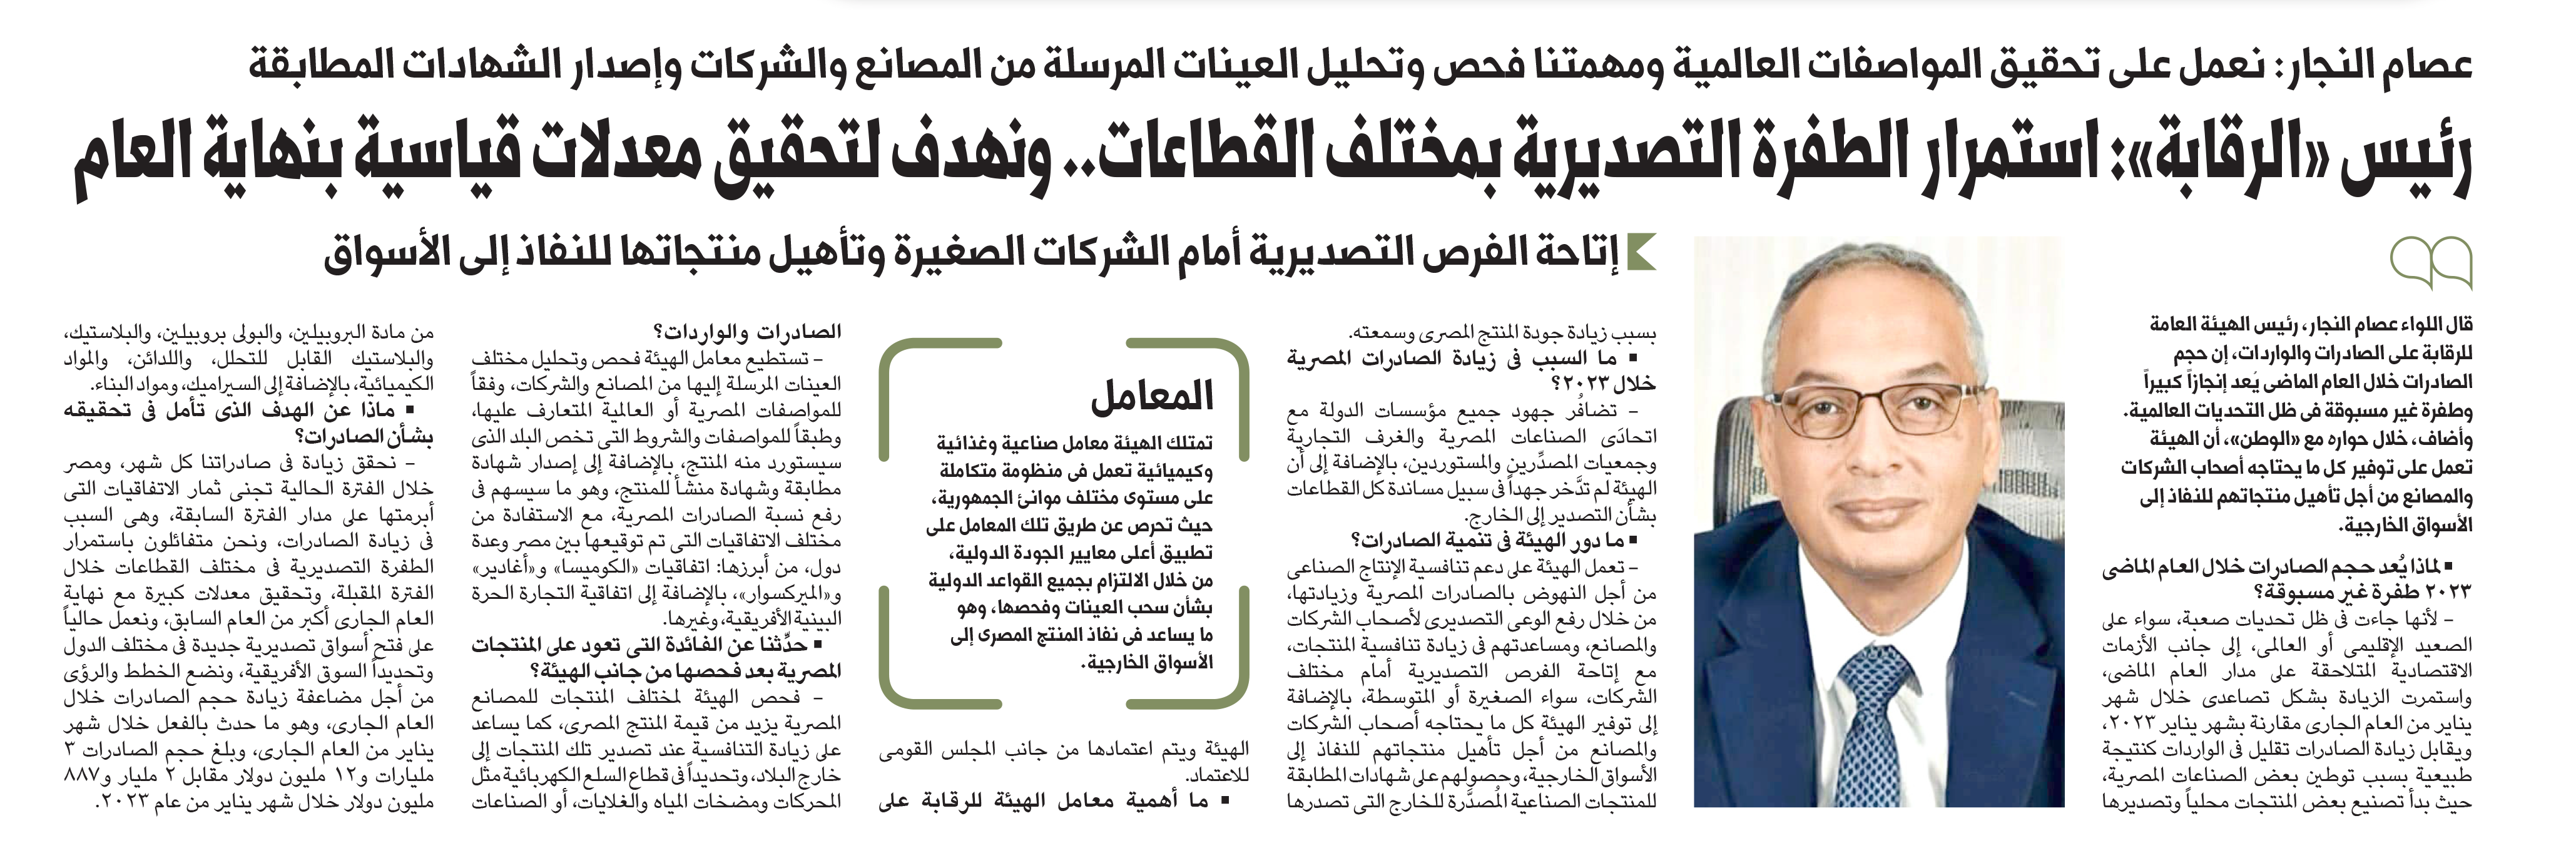 The Chairman of the GOEIC in an interview with Al-Watan newspaper about the continuation of the export boom in various sectors to achieve standard rates